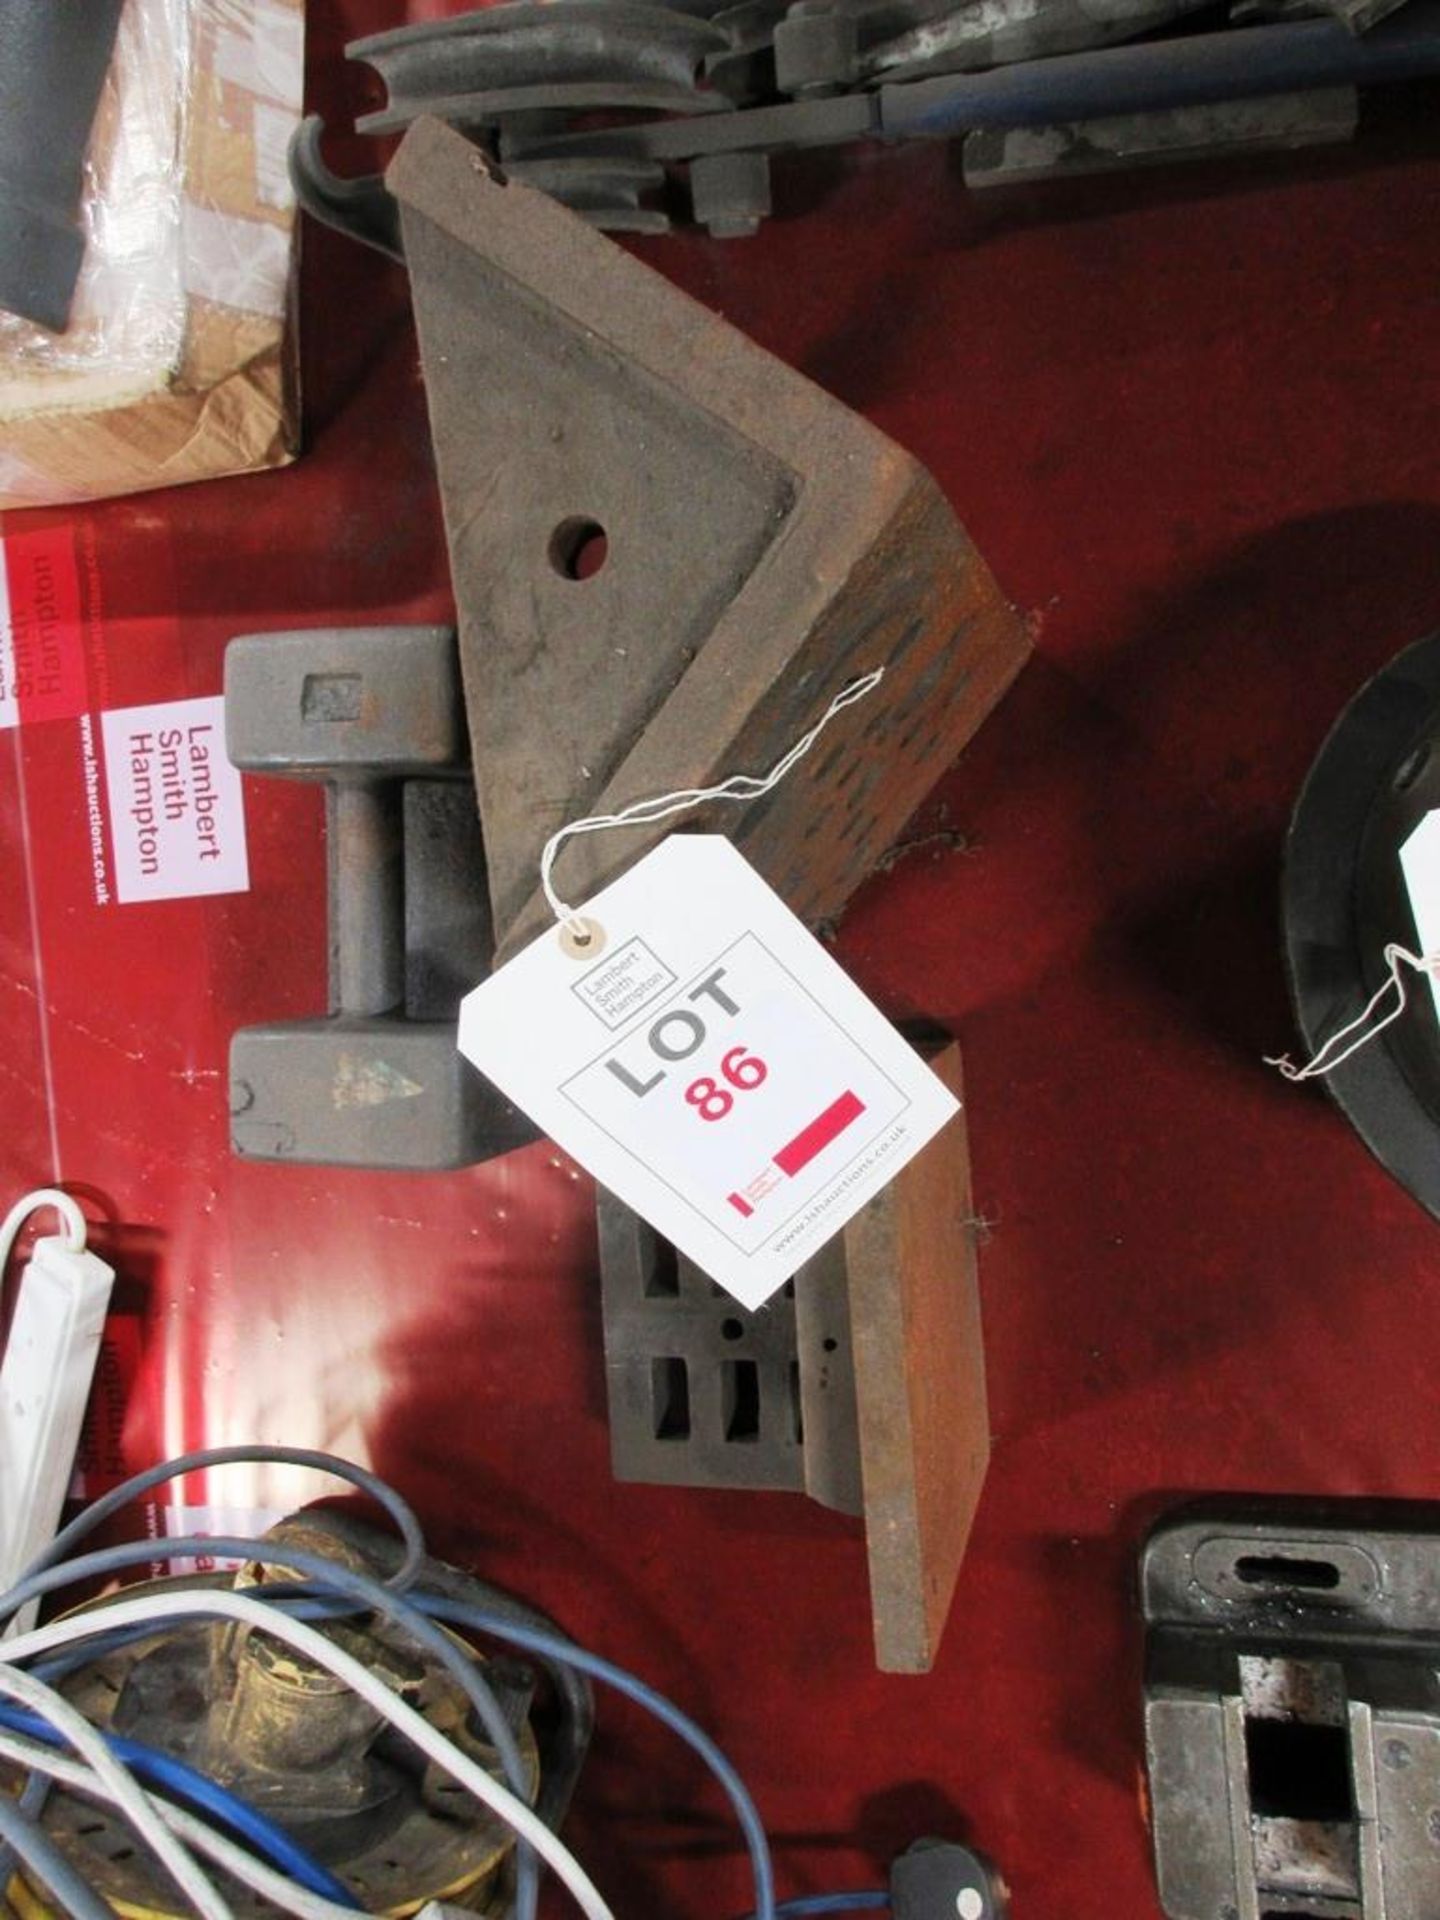 Three assorted angle plates, one 20kg weight